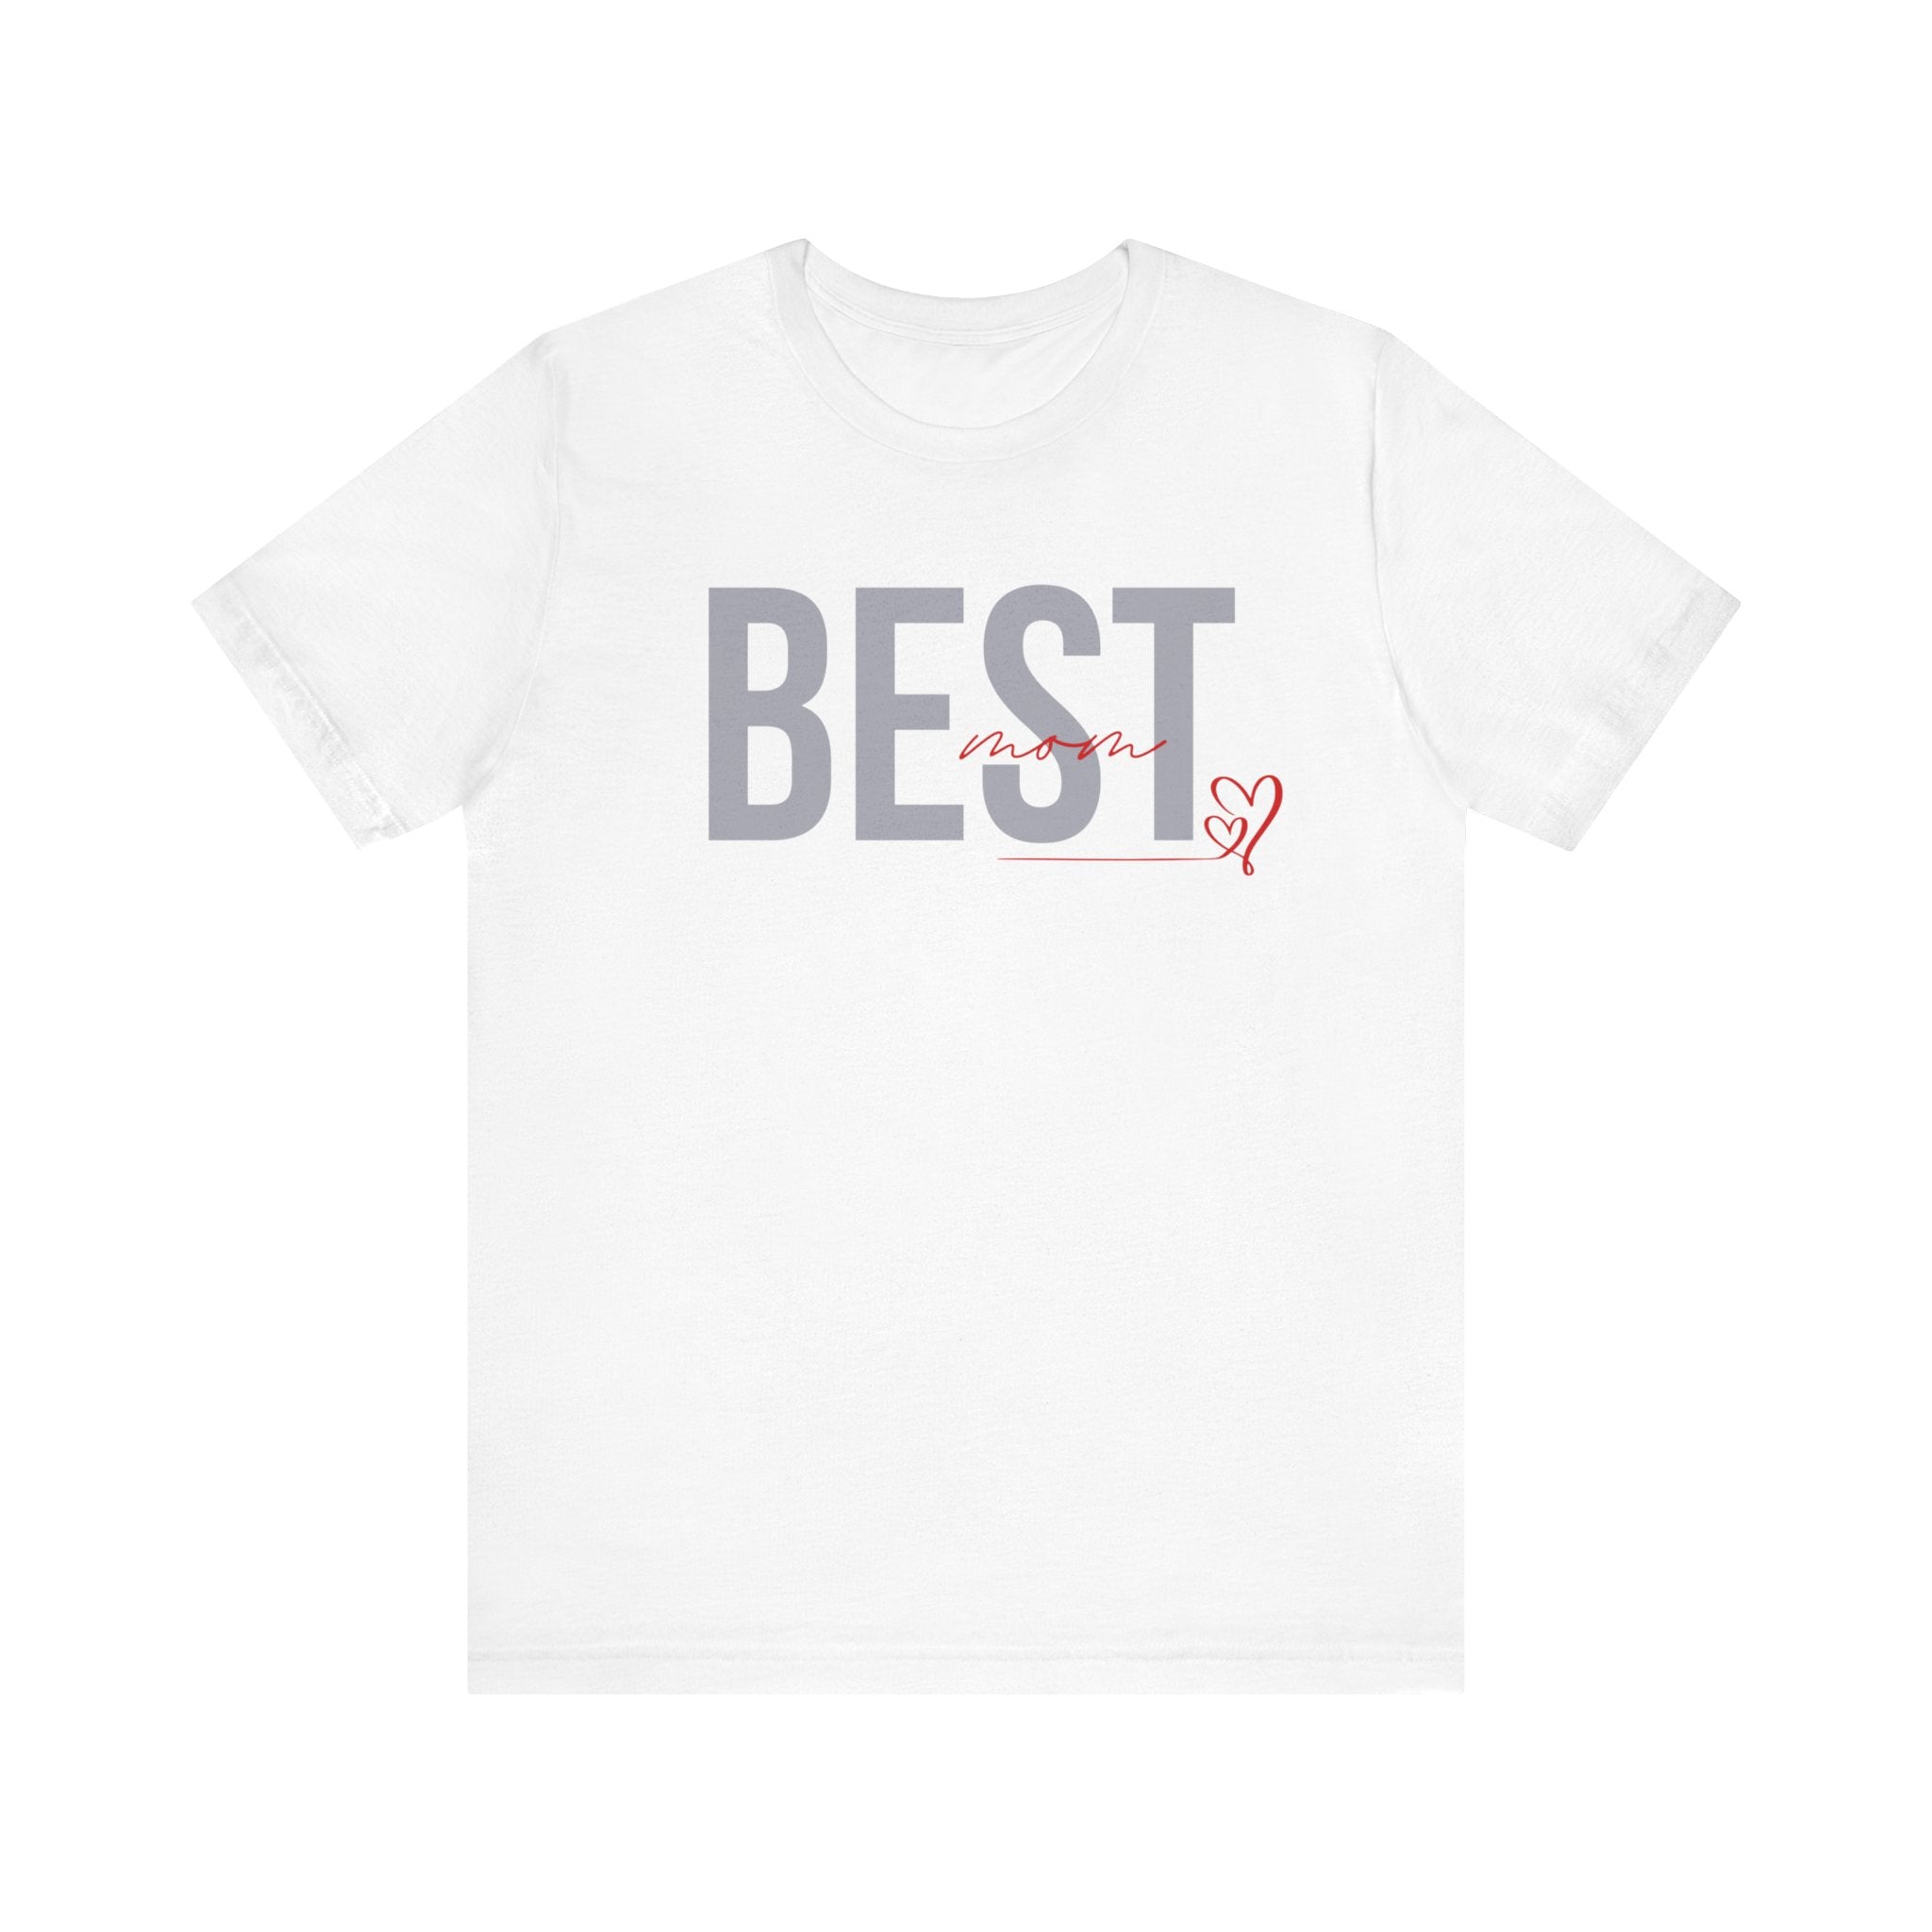 Best Mom Minimalist T-Shirt Gift for Her, Mothers Day Gift Shirts for Women, New Mom Gifts